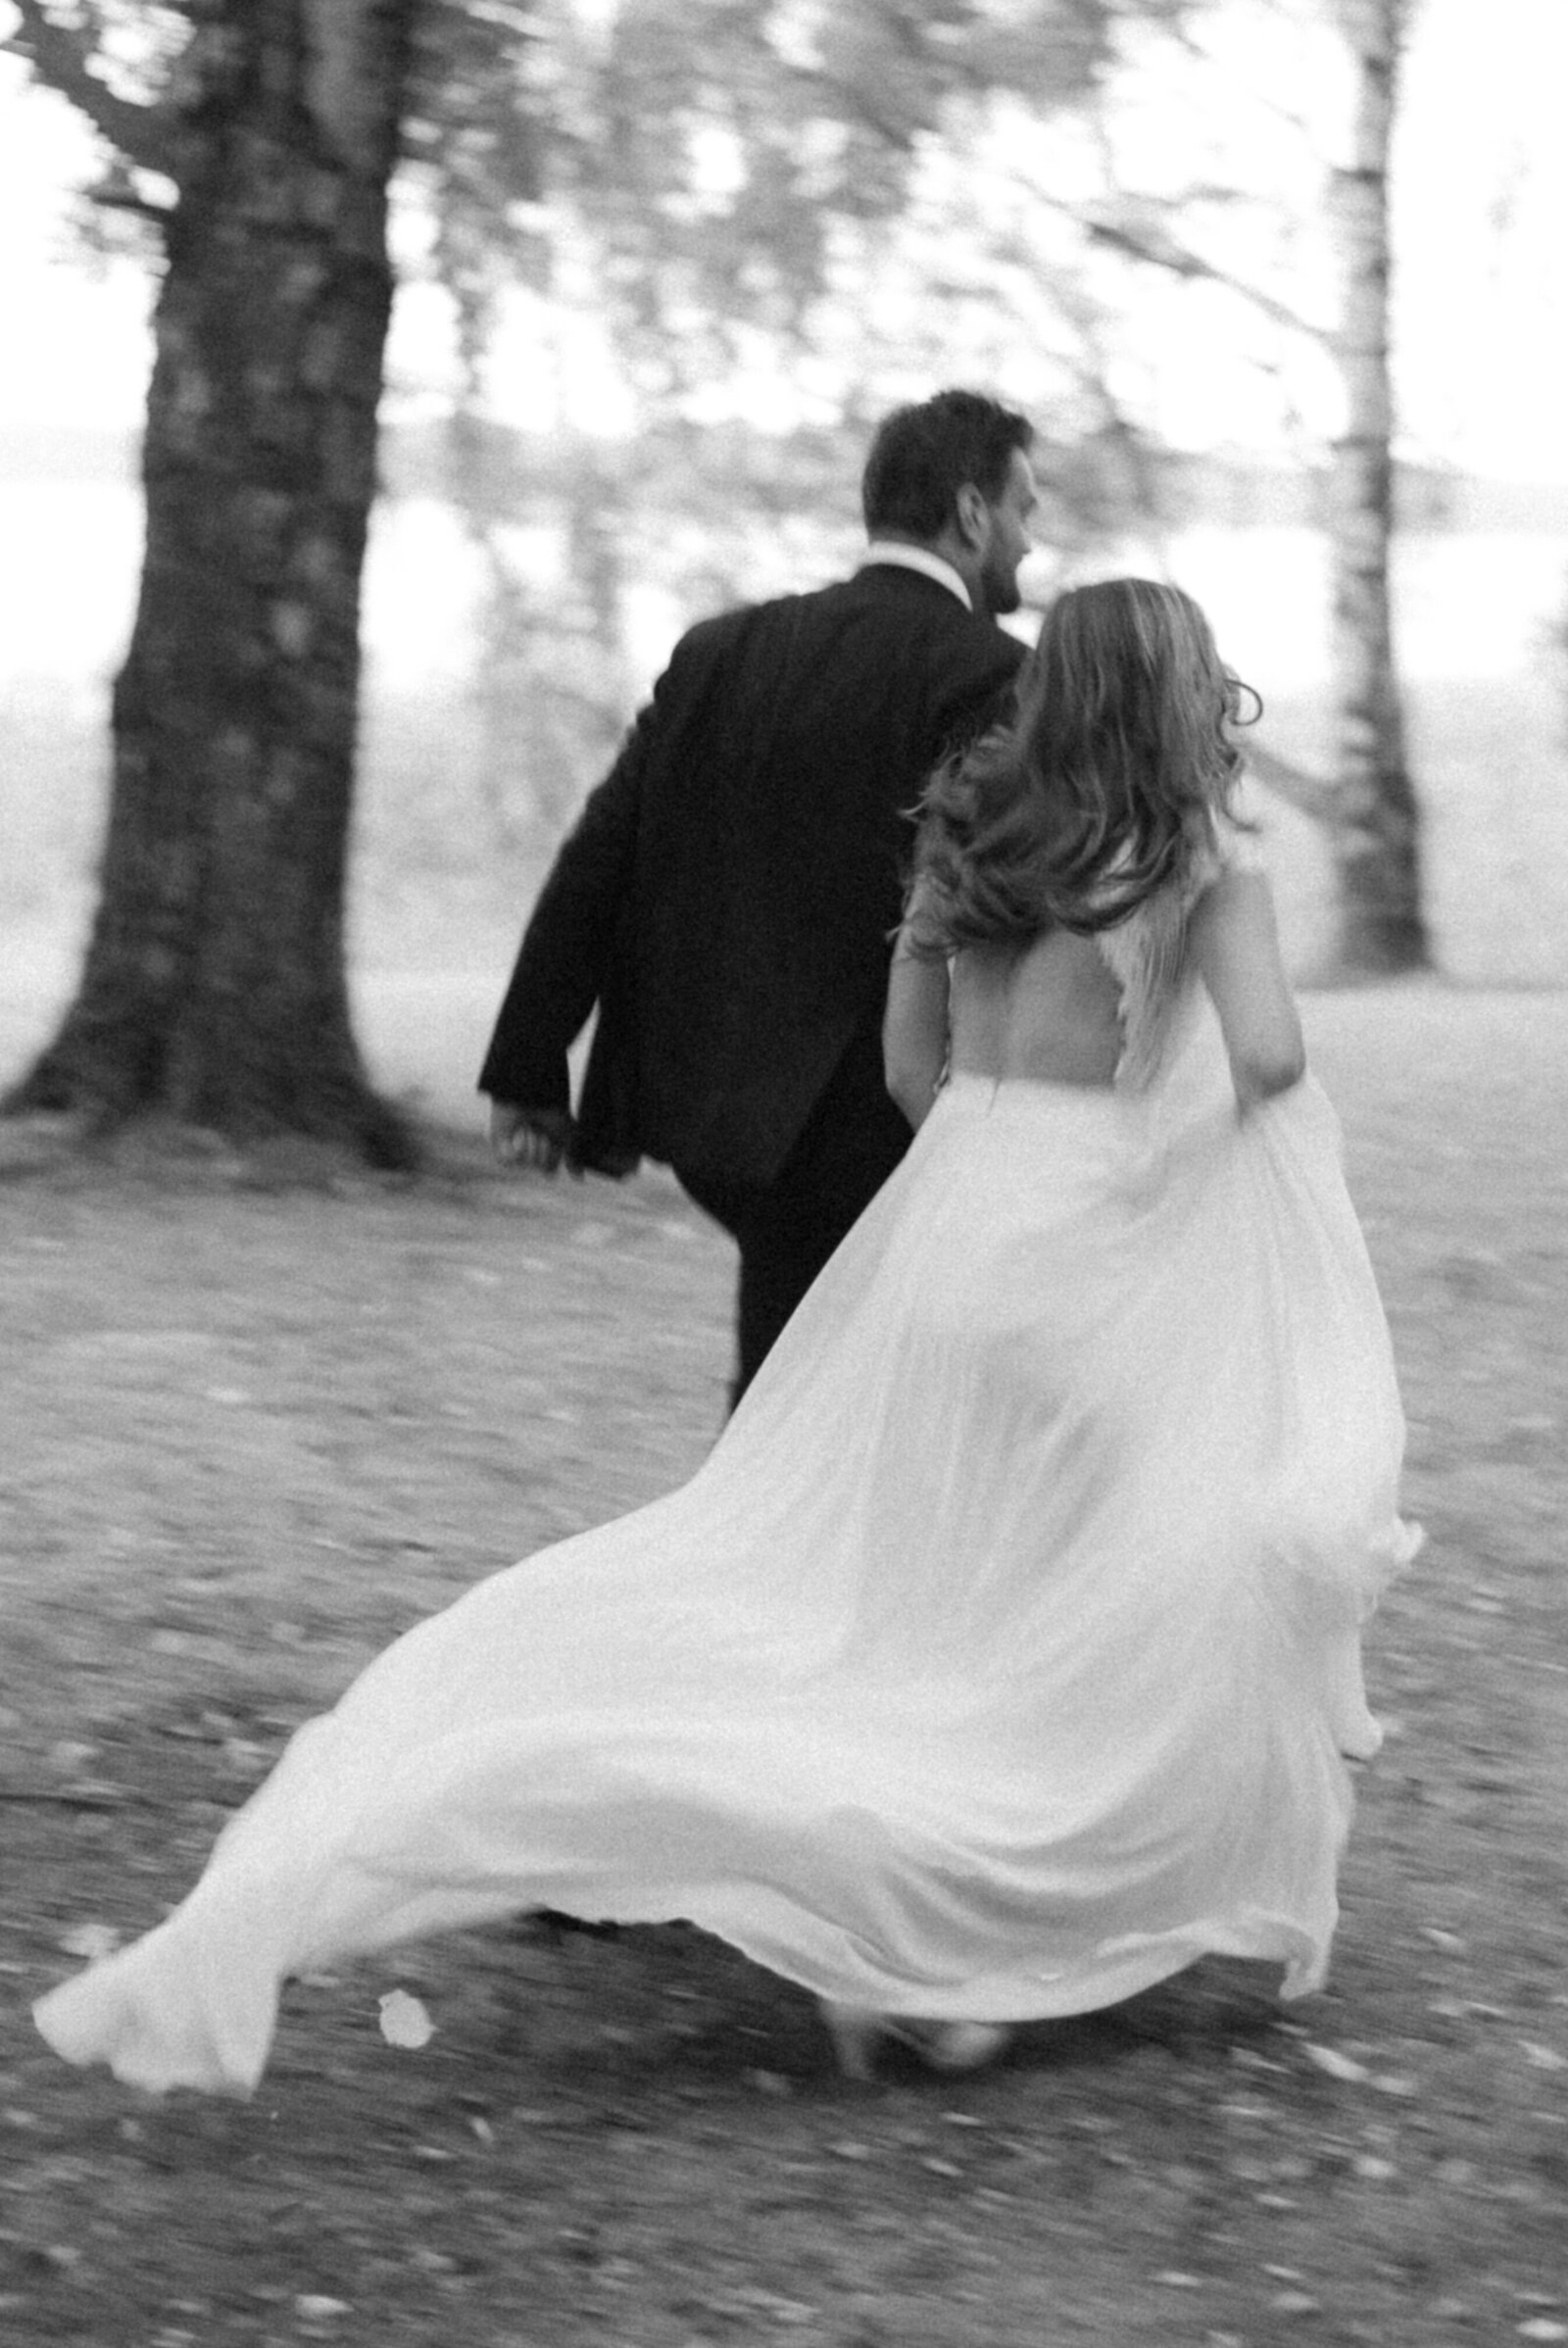 A wedding photograph of bride and groom running during their photo shoot. The tail of the wedding dress flutters in the wind. An image photographed by wedding photographer Hannika Gabrielsson.